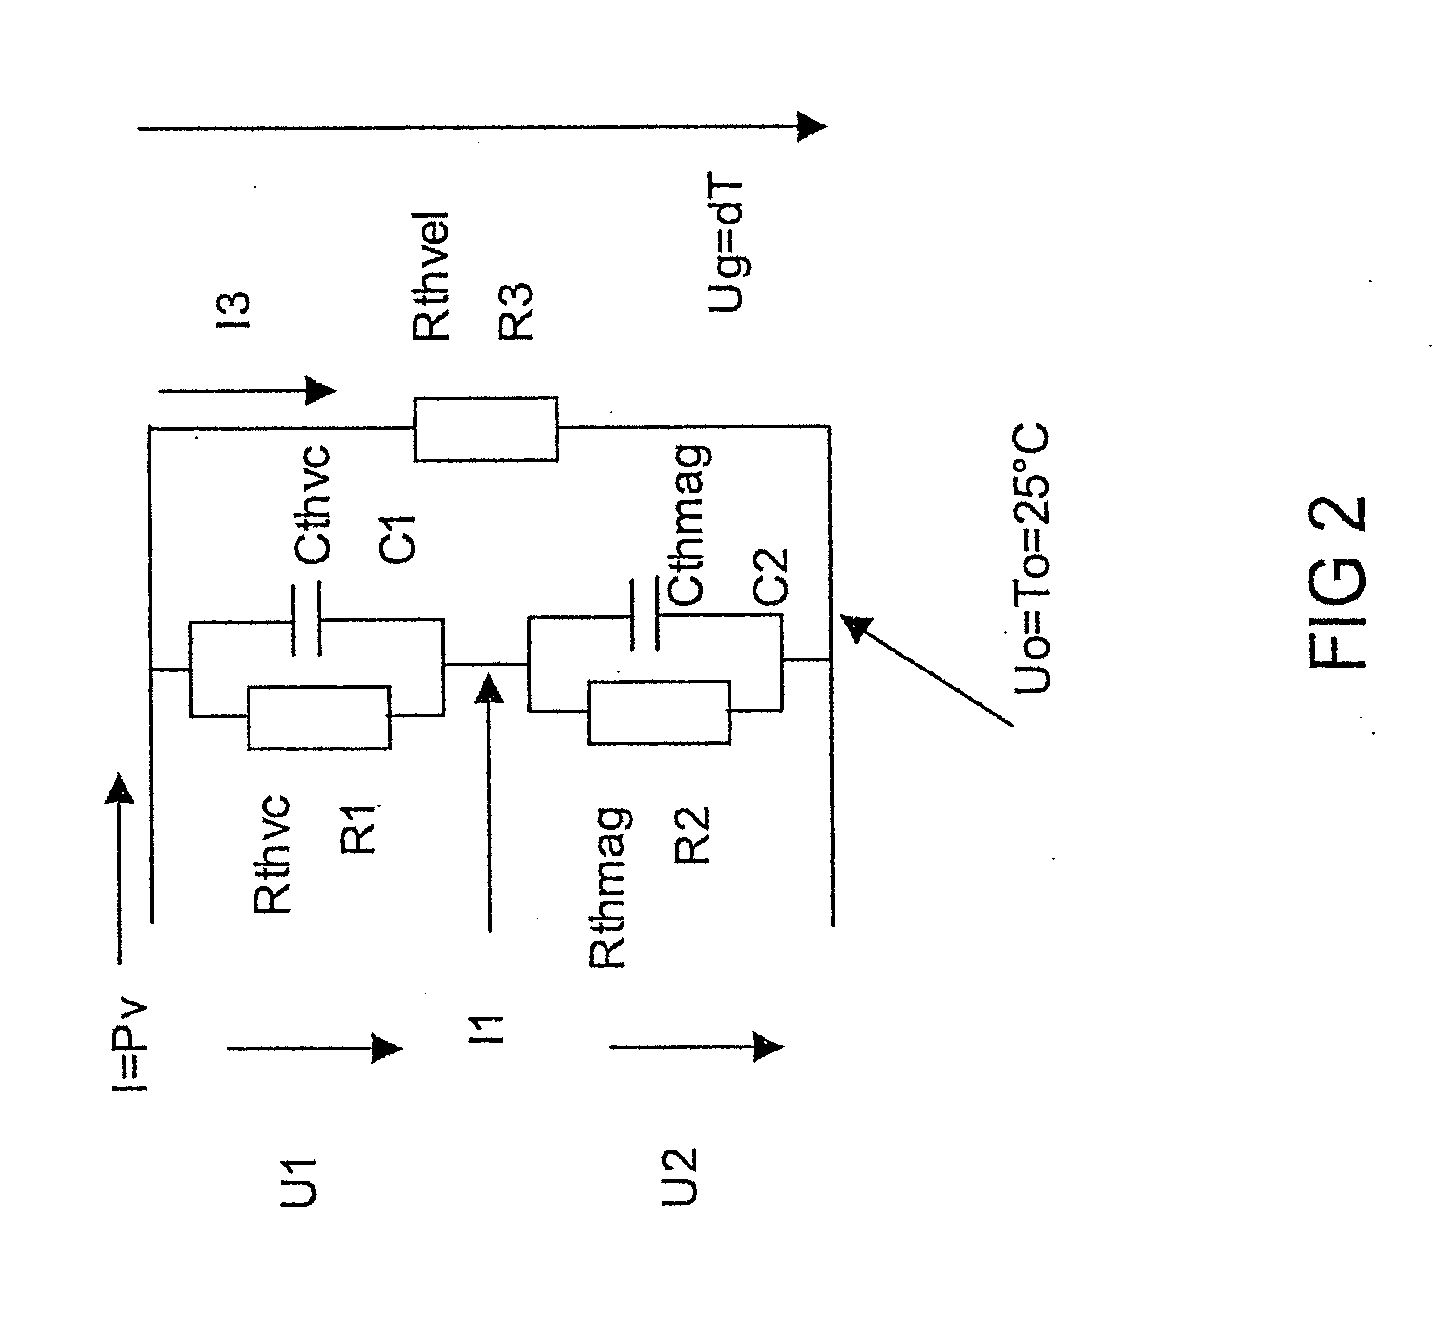 System for predicting the behavior of a transducer